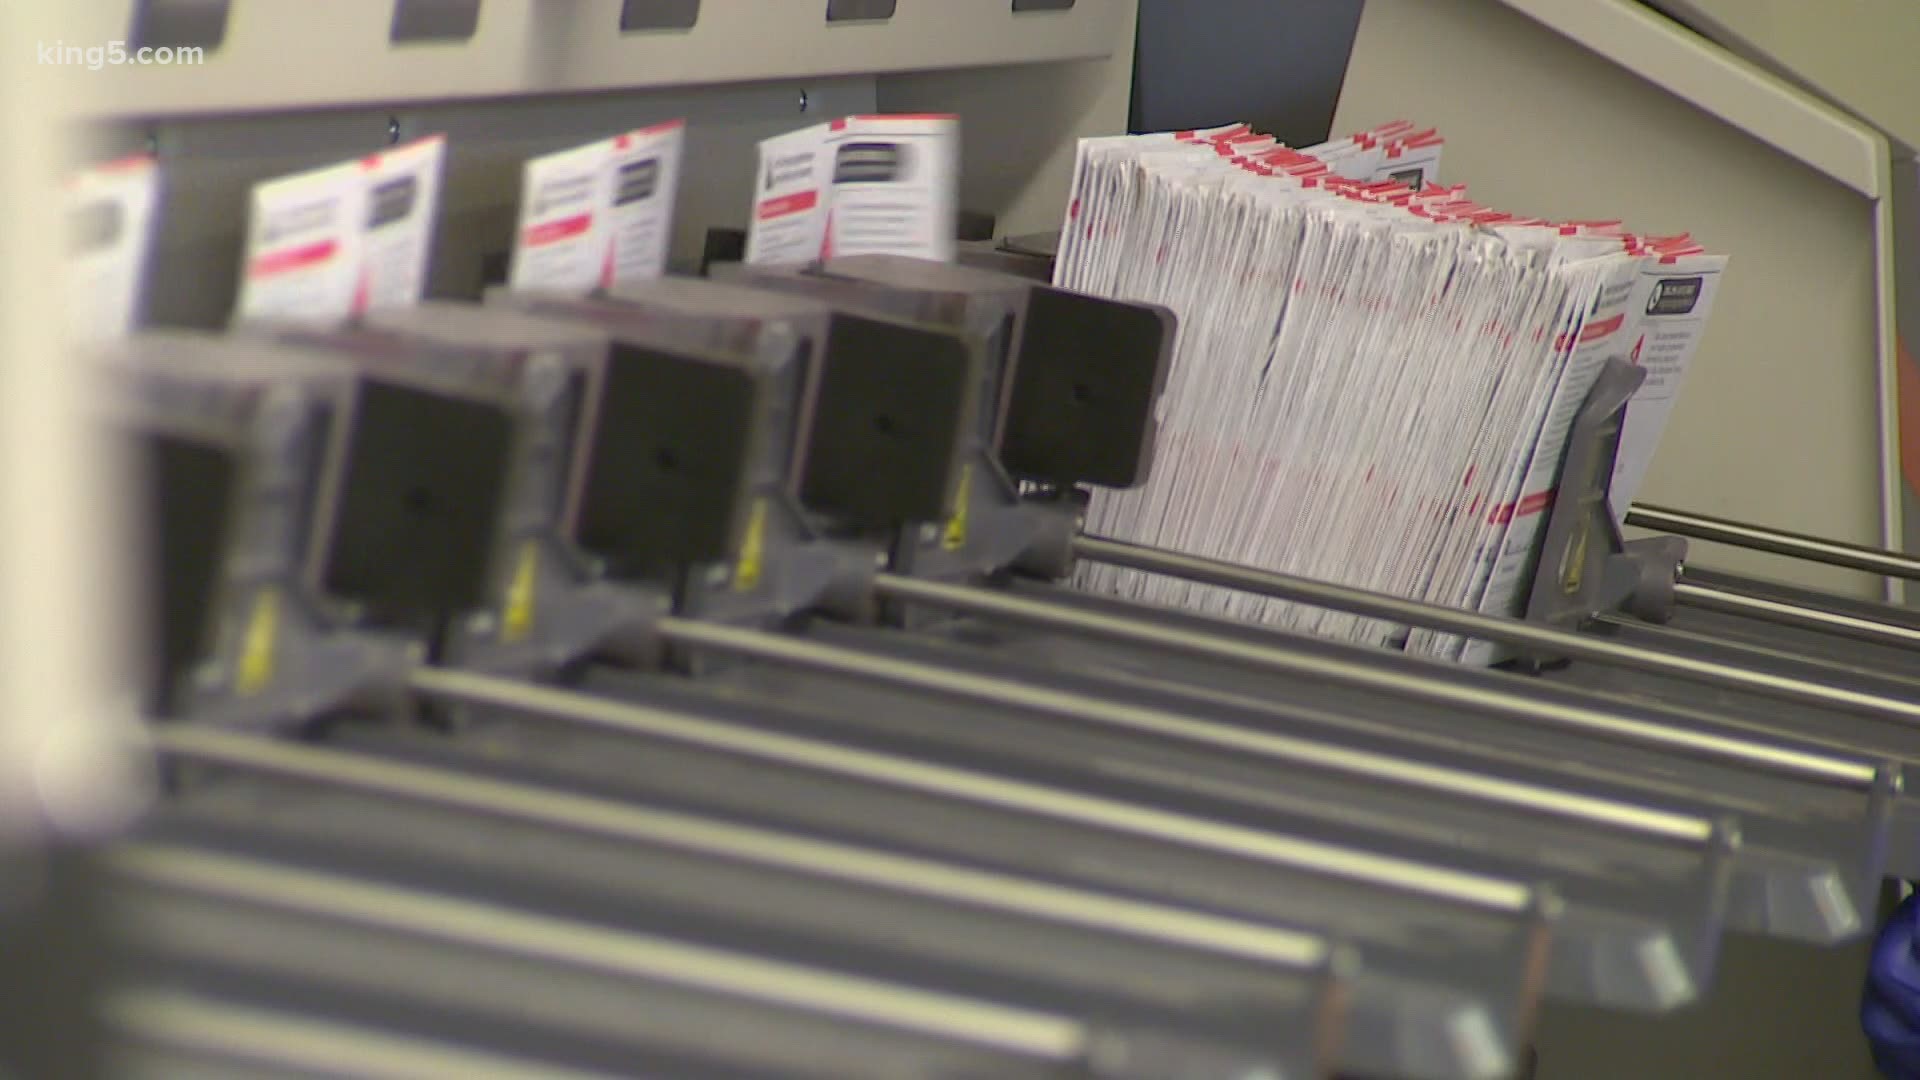 Local election officials are confident that the system is secure and being heavily monitored for potential fraud in the Washington 2020 election.